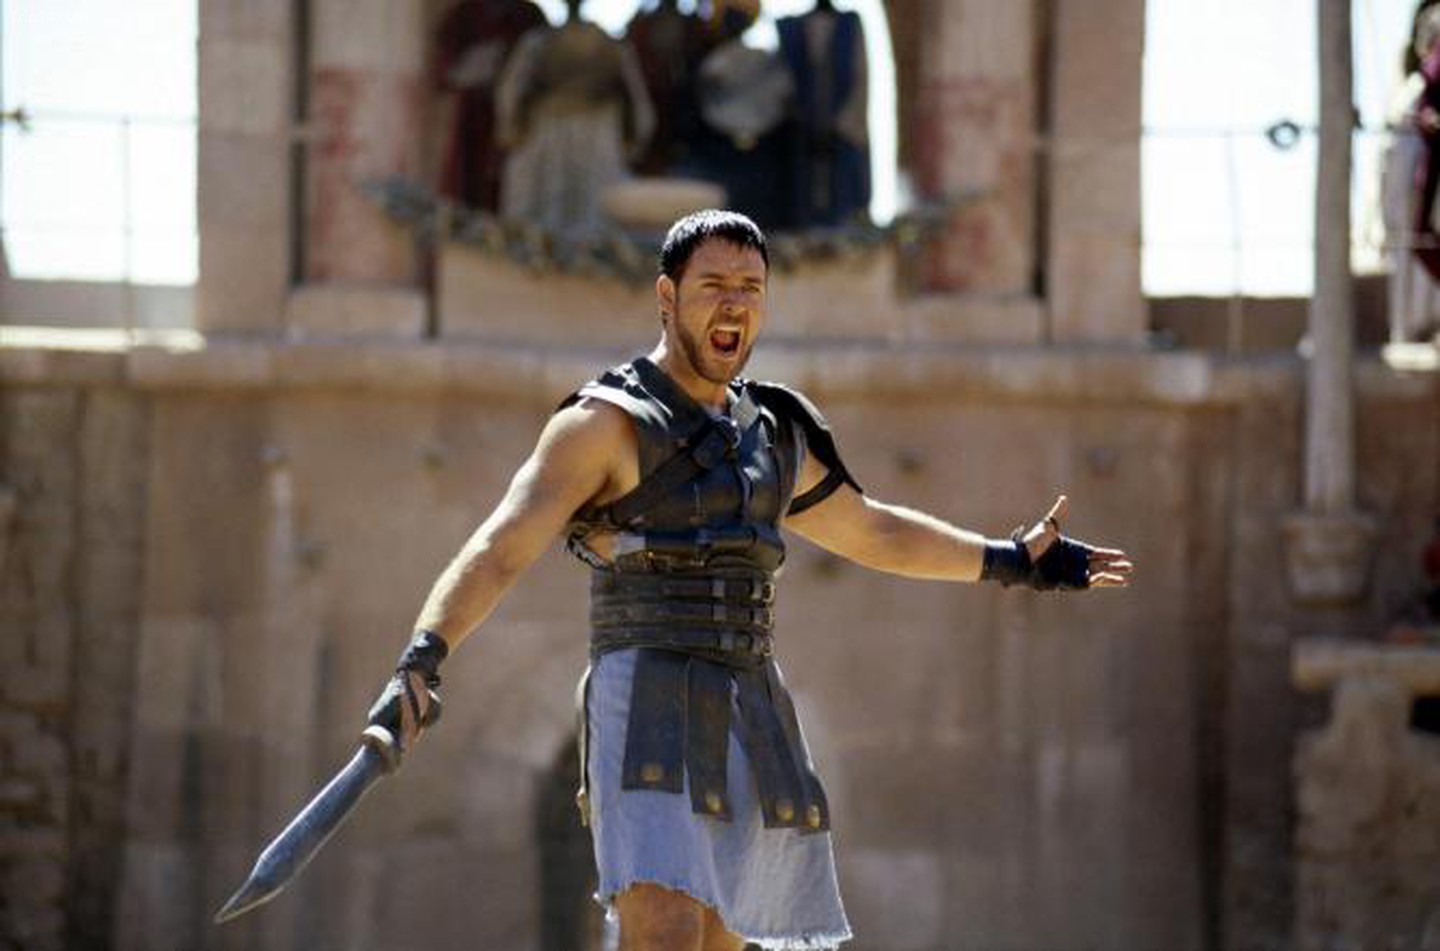  Russell Crowe trong 'Gladiator'   |   